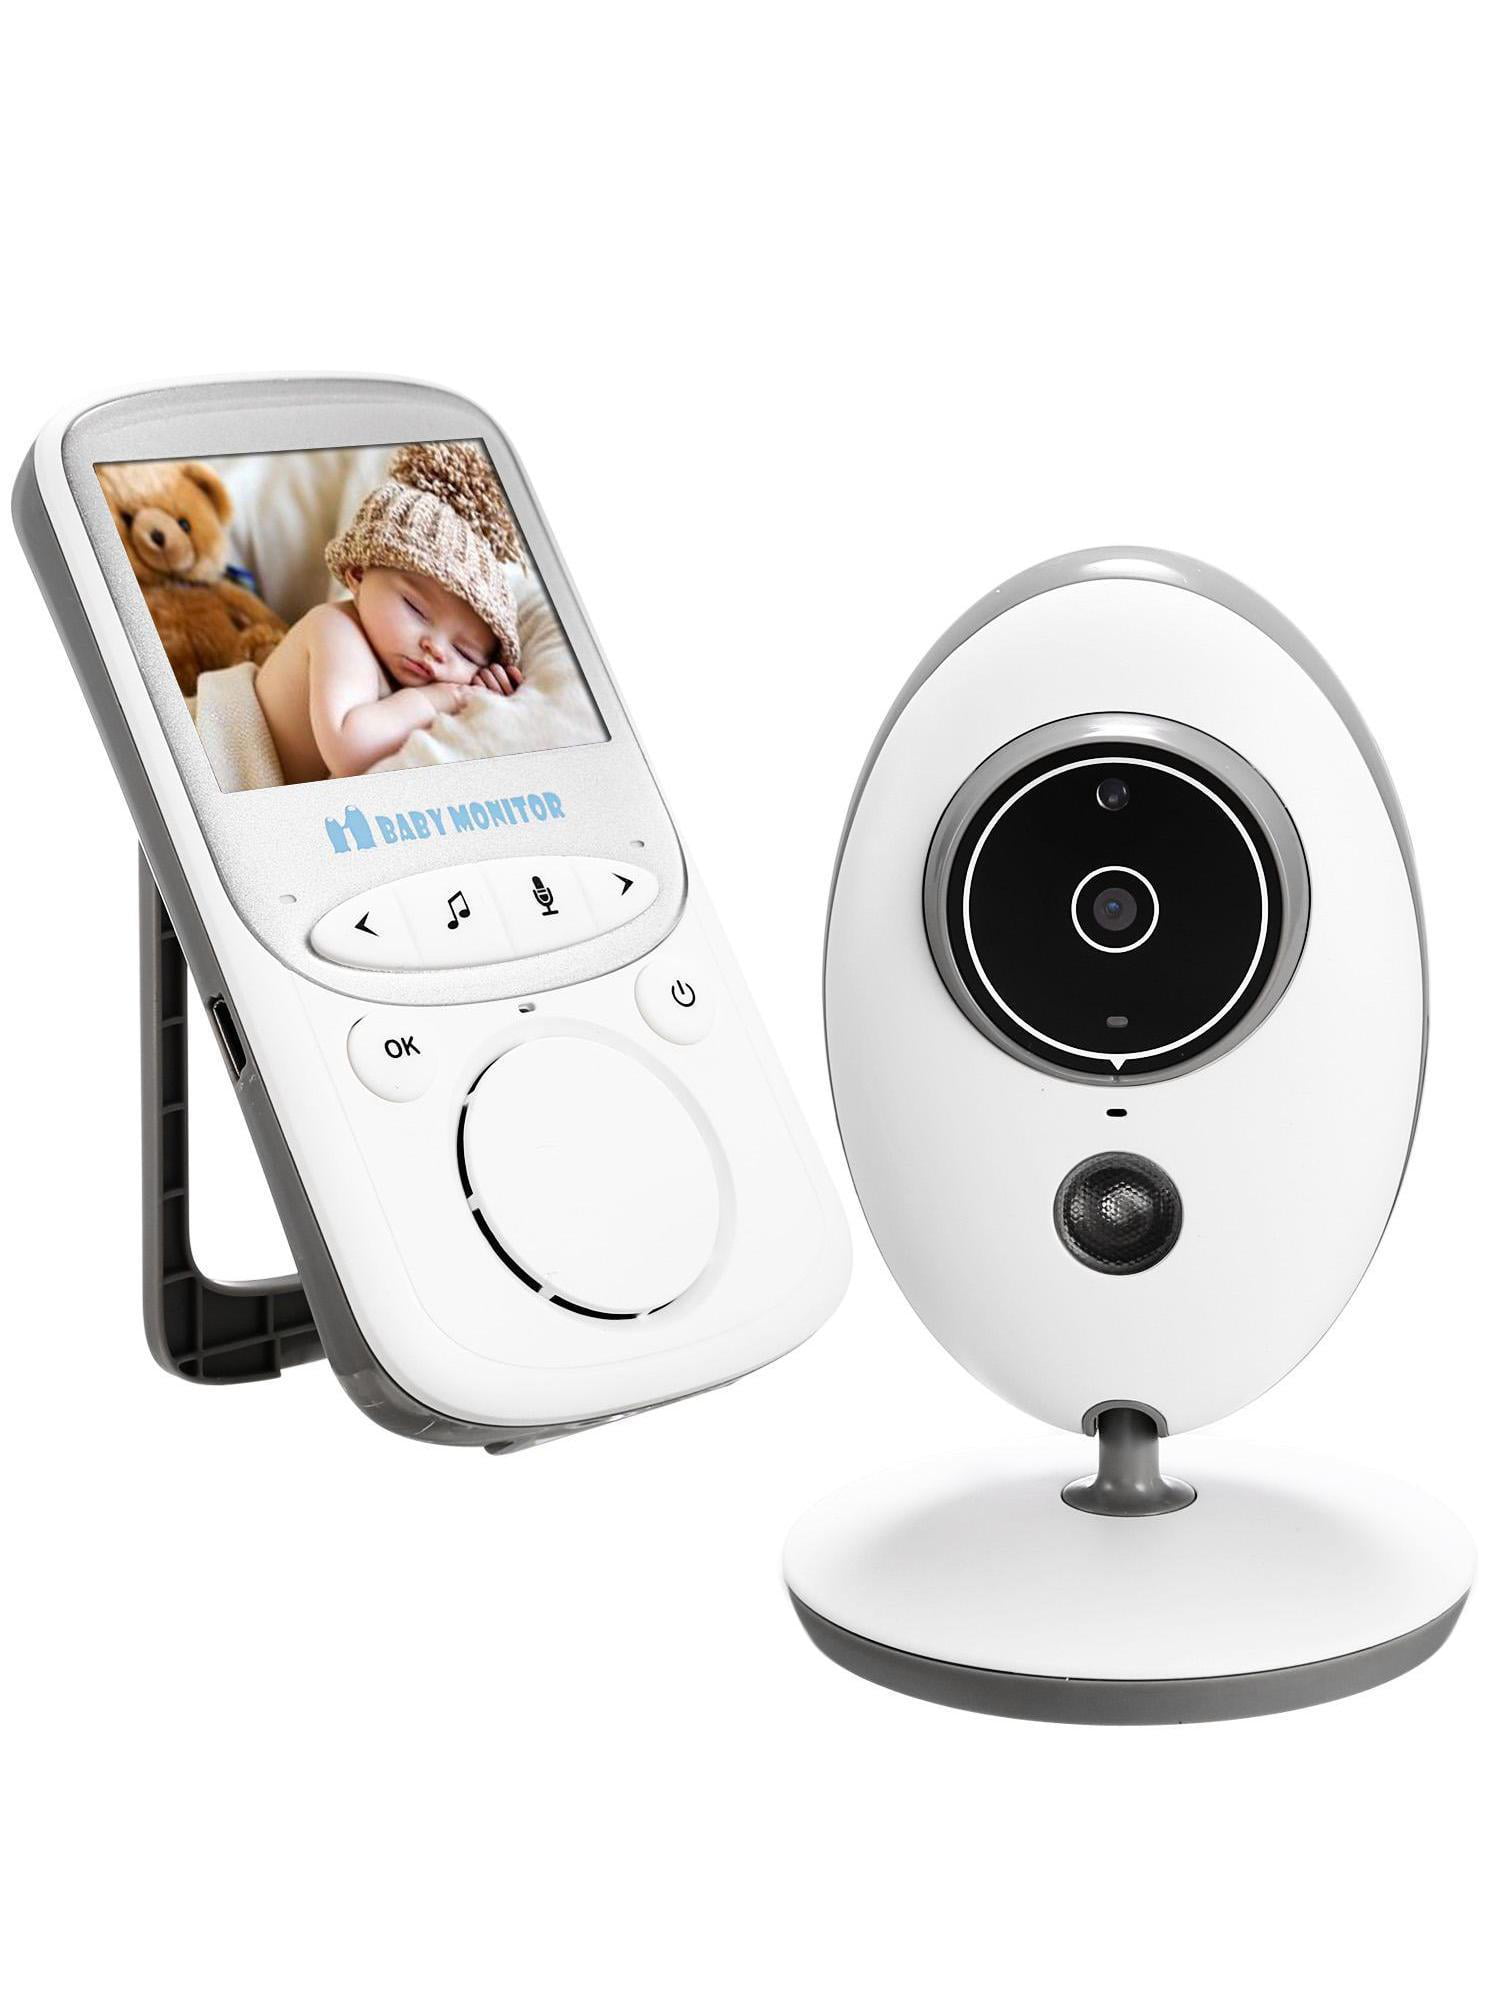 Video Baby Monitor,Wireless Infant Monitor with Night Vision, Two Way Talkback System